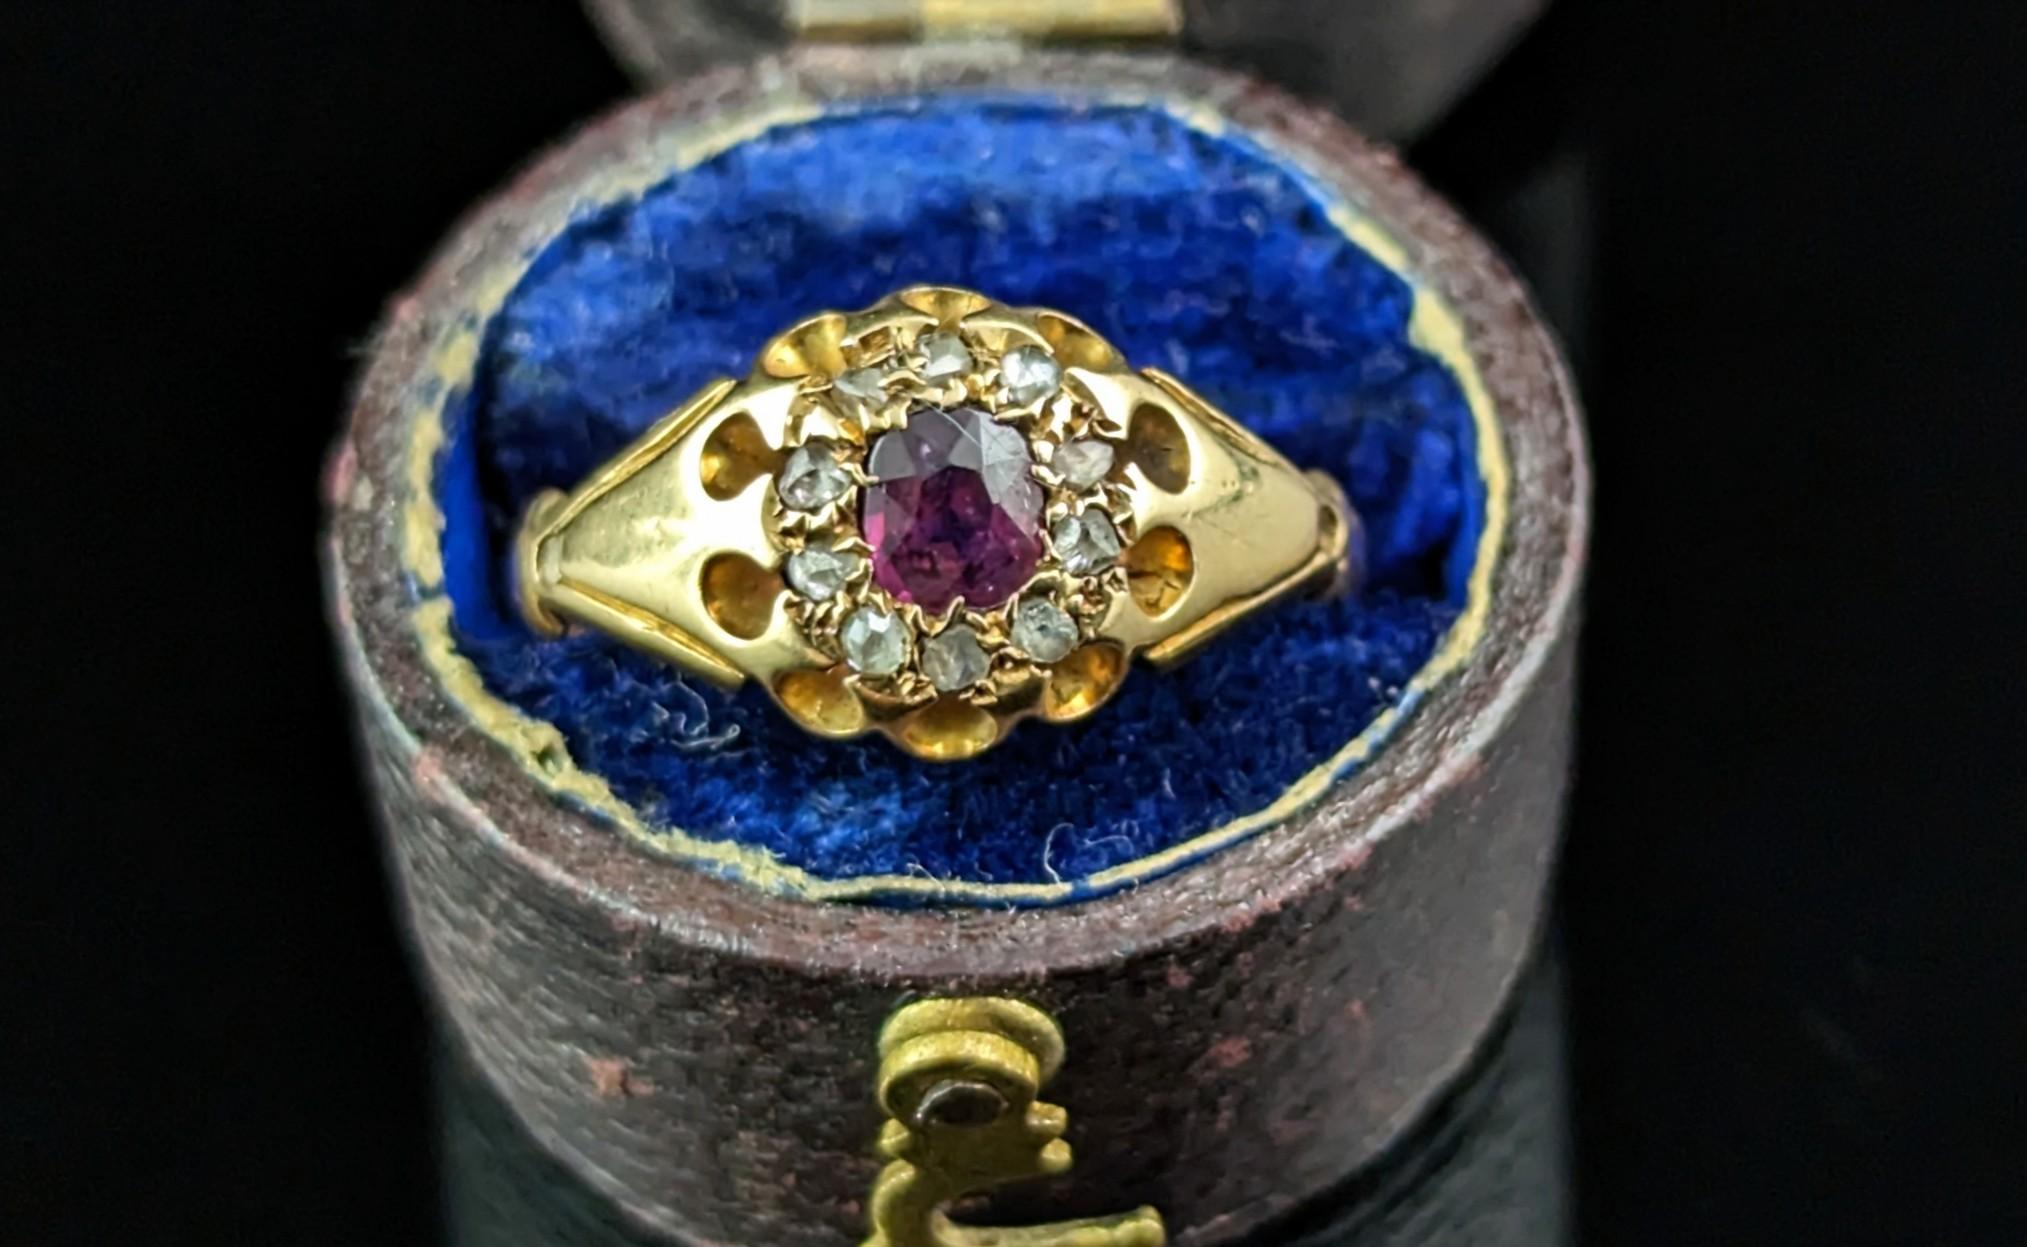 A classic and timeless antique cluster ring is a perfect gifting or engagement ring choice.

This gorgeous Edwardian era cluster ring is one of those elegant beauties, it features a lovely pinky red ruby which is surrounded by a halo of rose cut